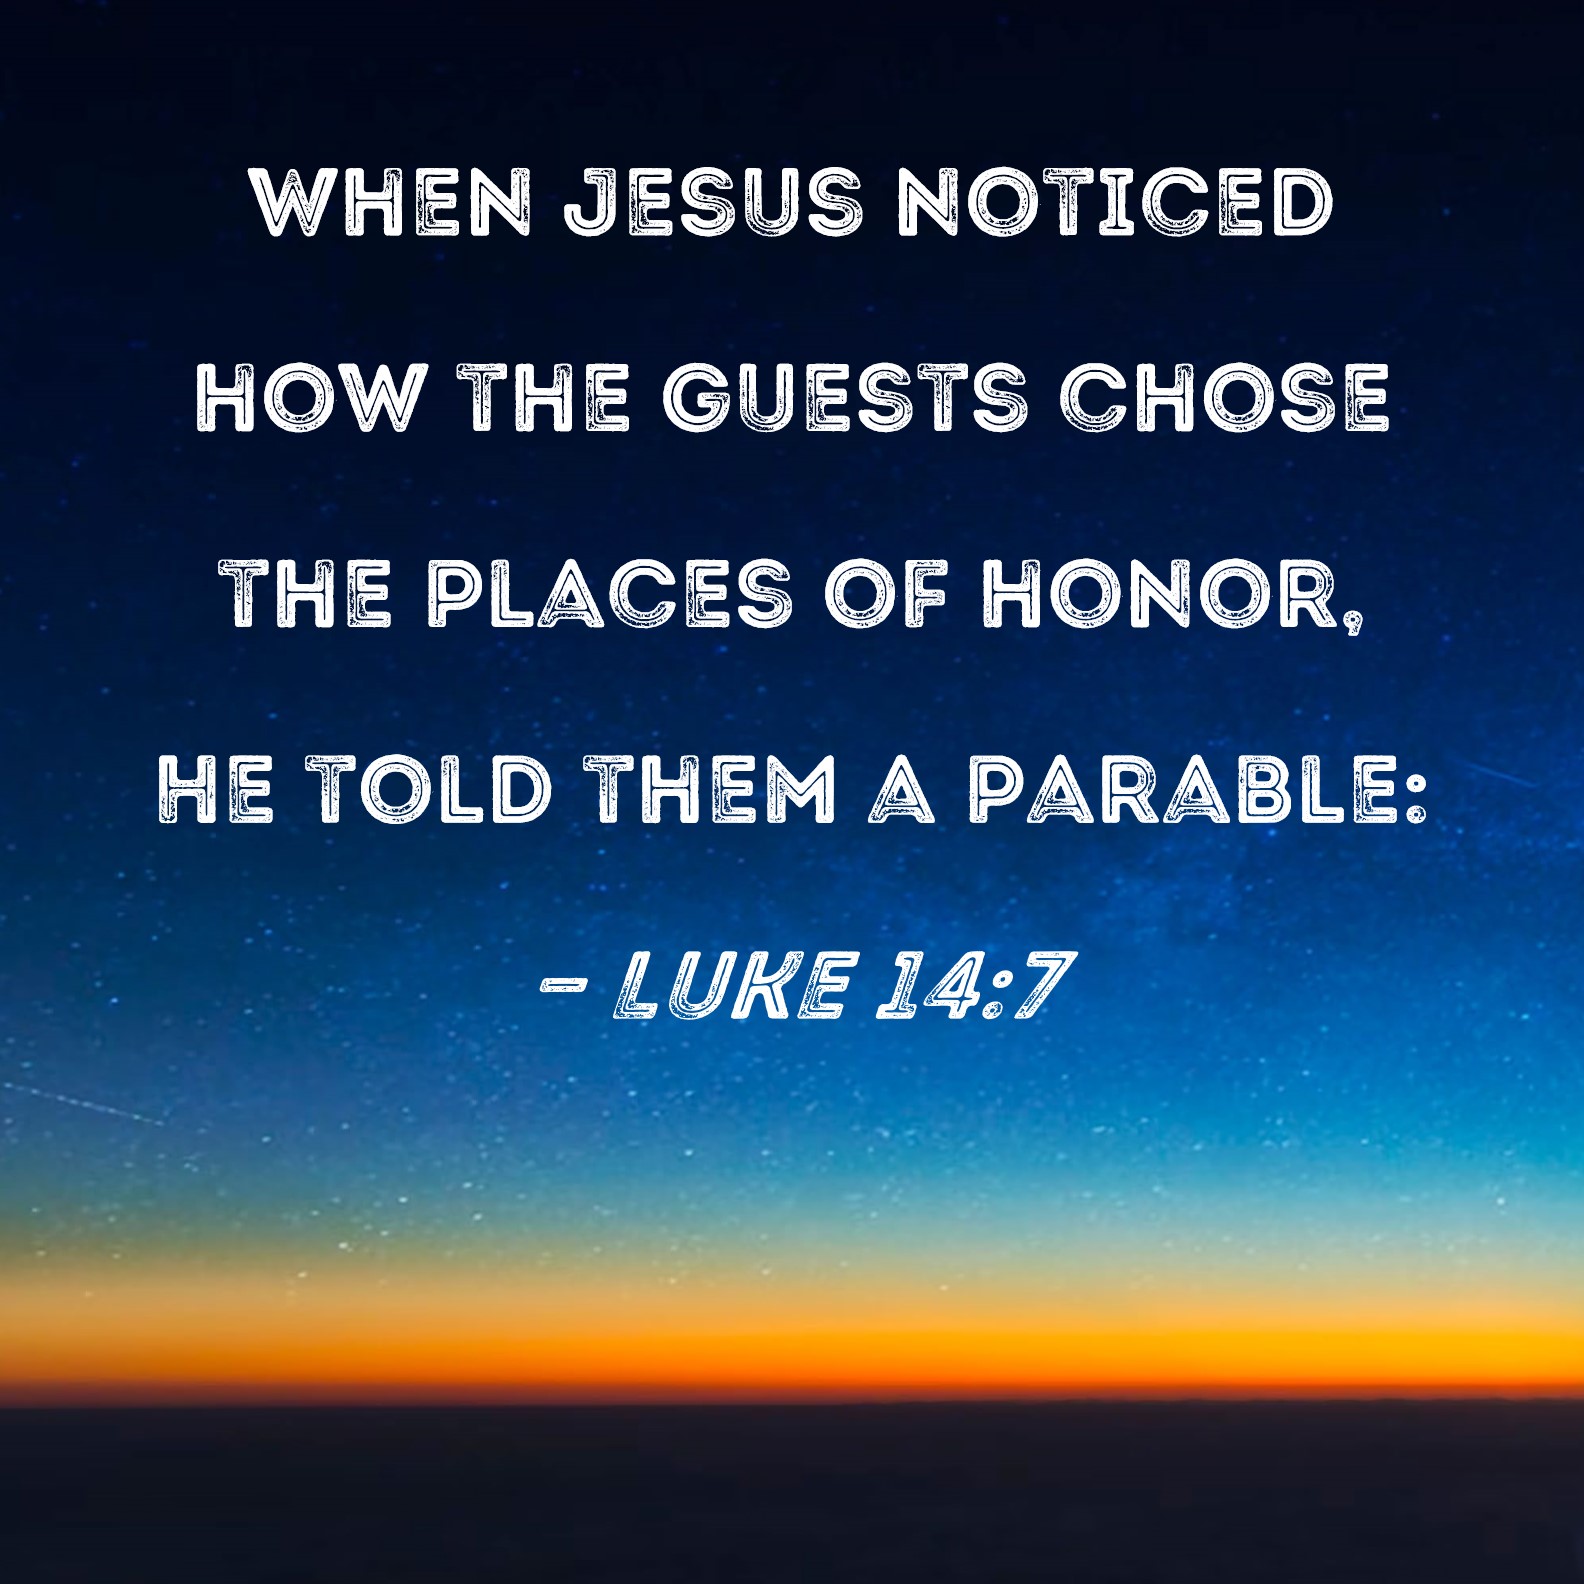 luke-14-7-when-jesus-noticed-how-the-guests-chose-the-places-of-honor